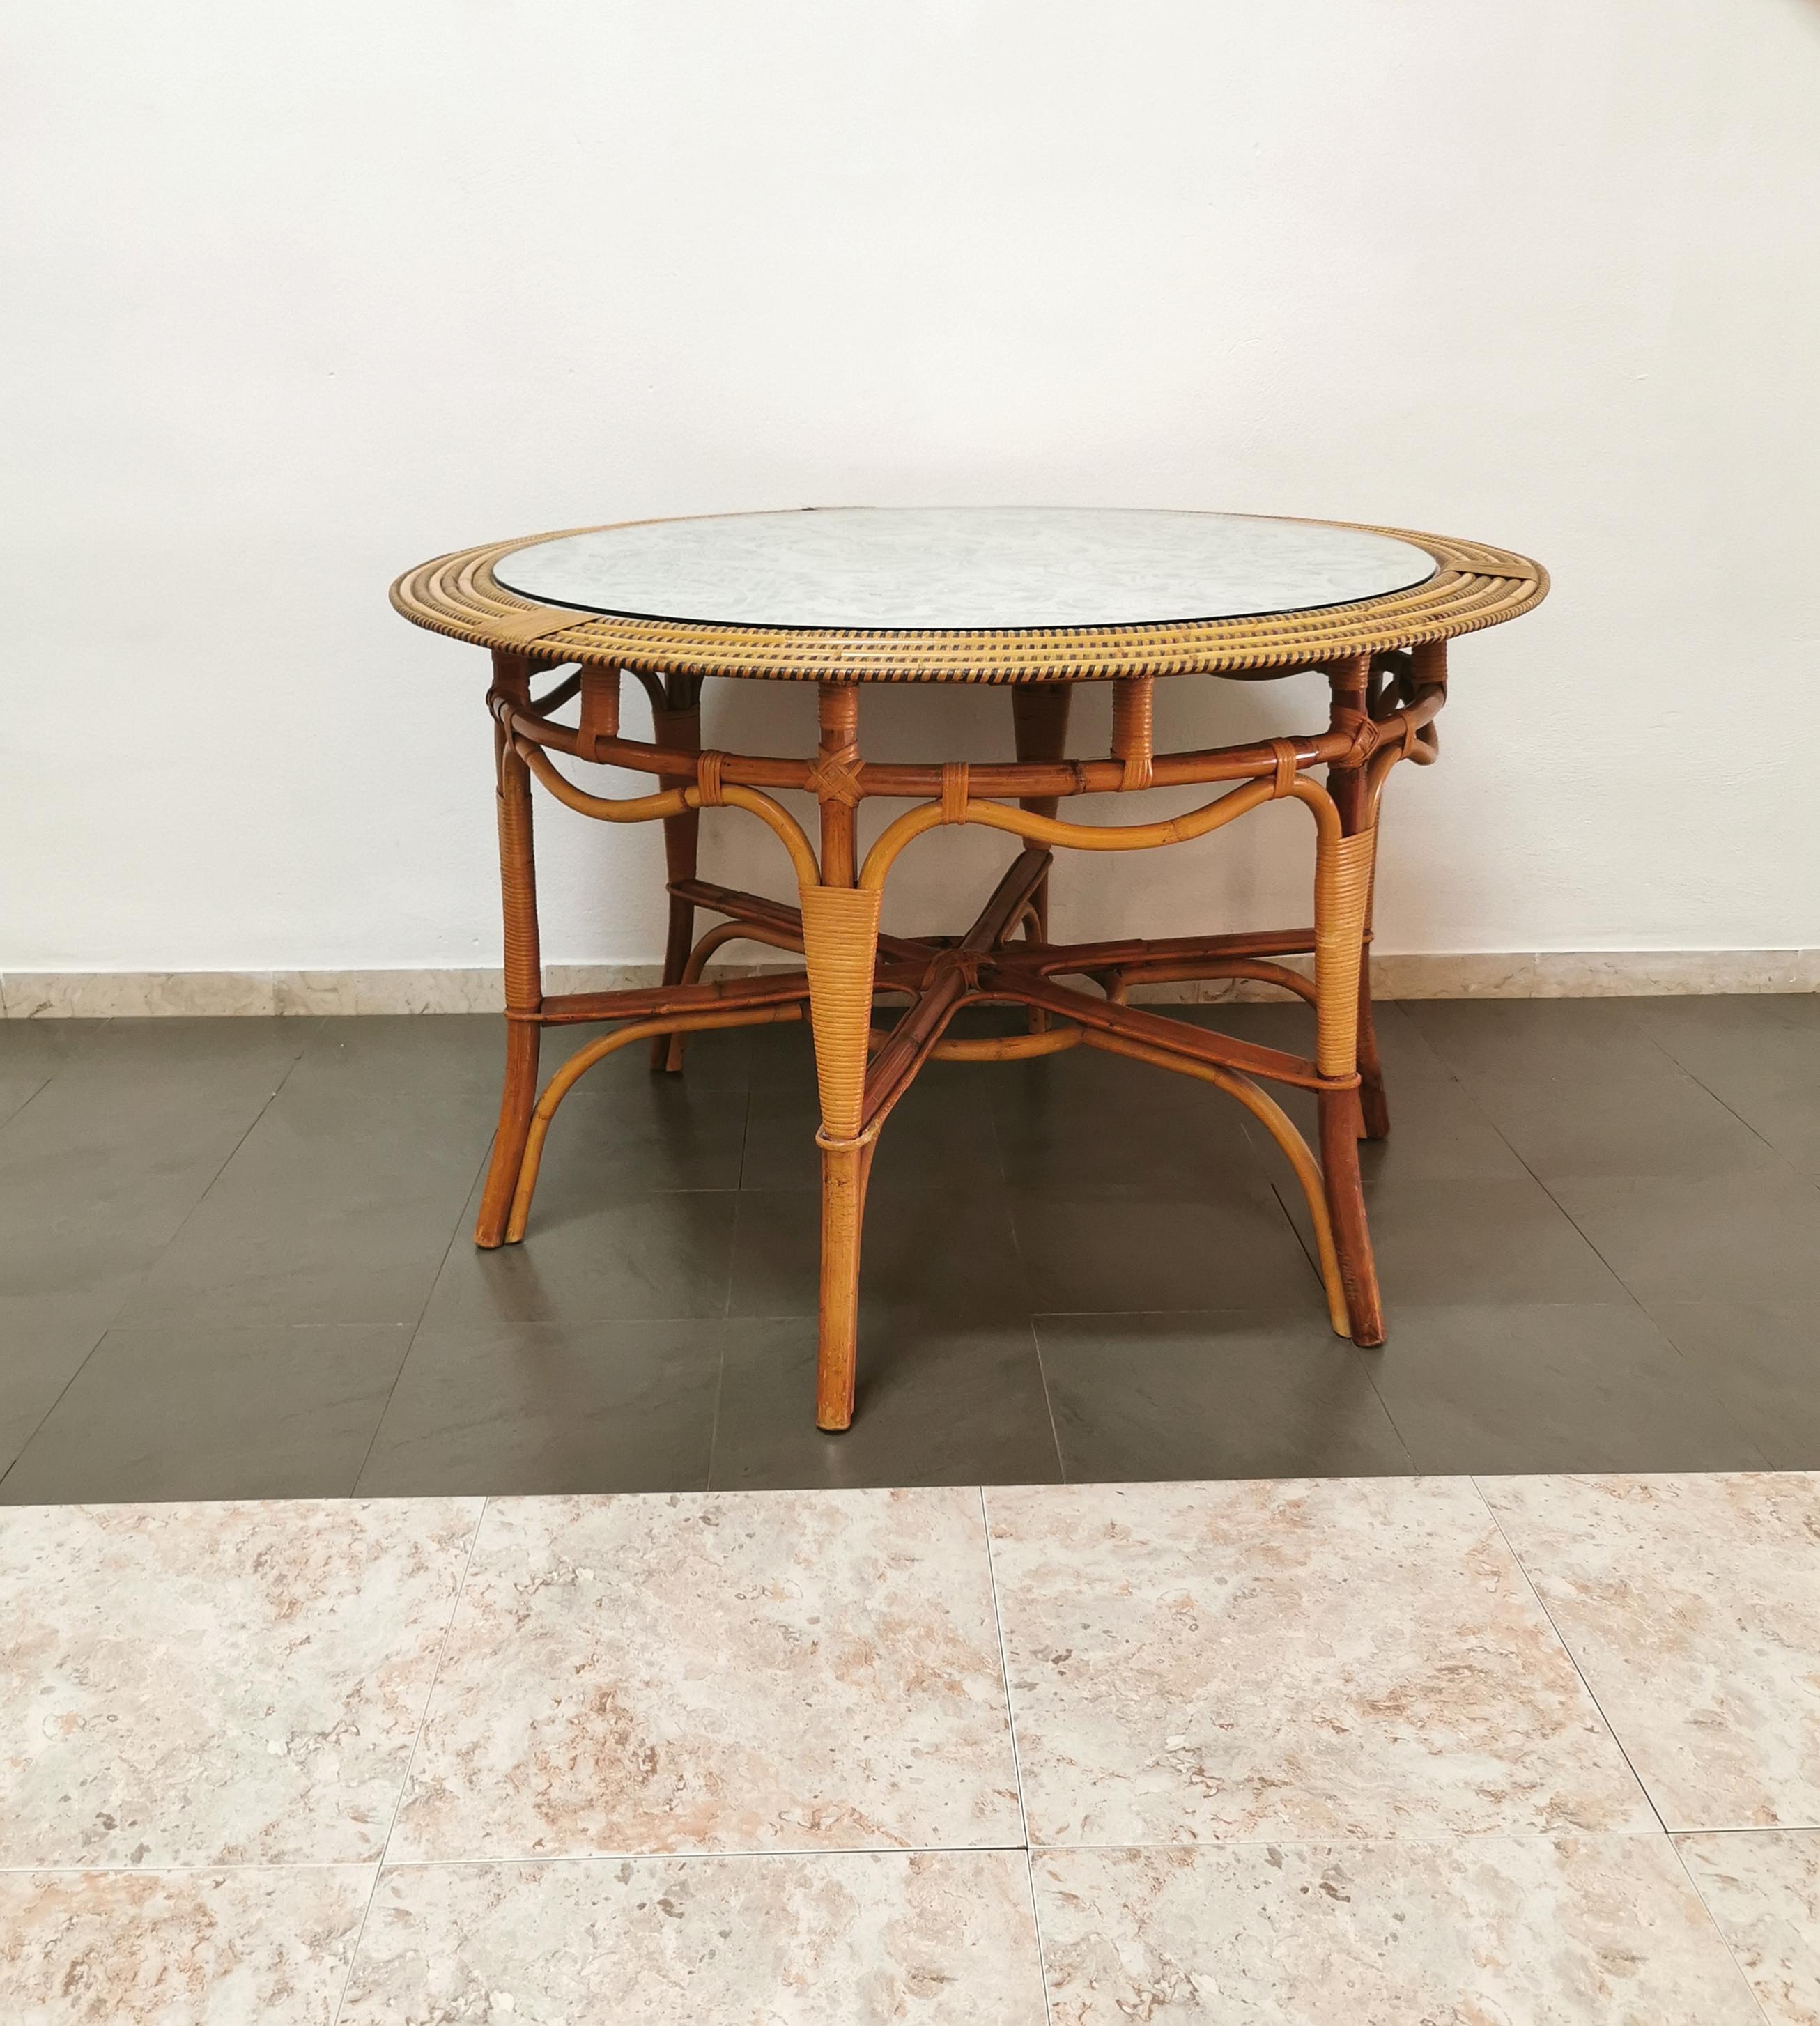 Dining or living room table produced in Italy in the 70s by the Vivai del sud company. The circular table was made of bamboo and rattan, with green weaves and a top in floral patterned fabric by the renowned Italian designer Valentino, where a